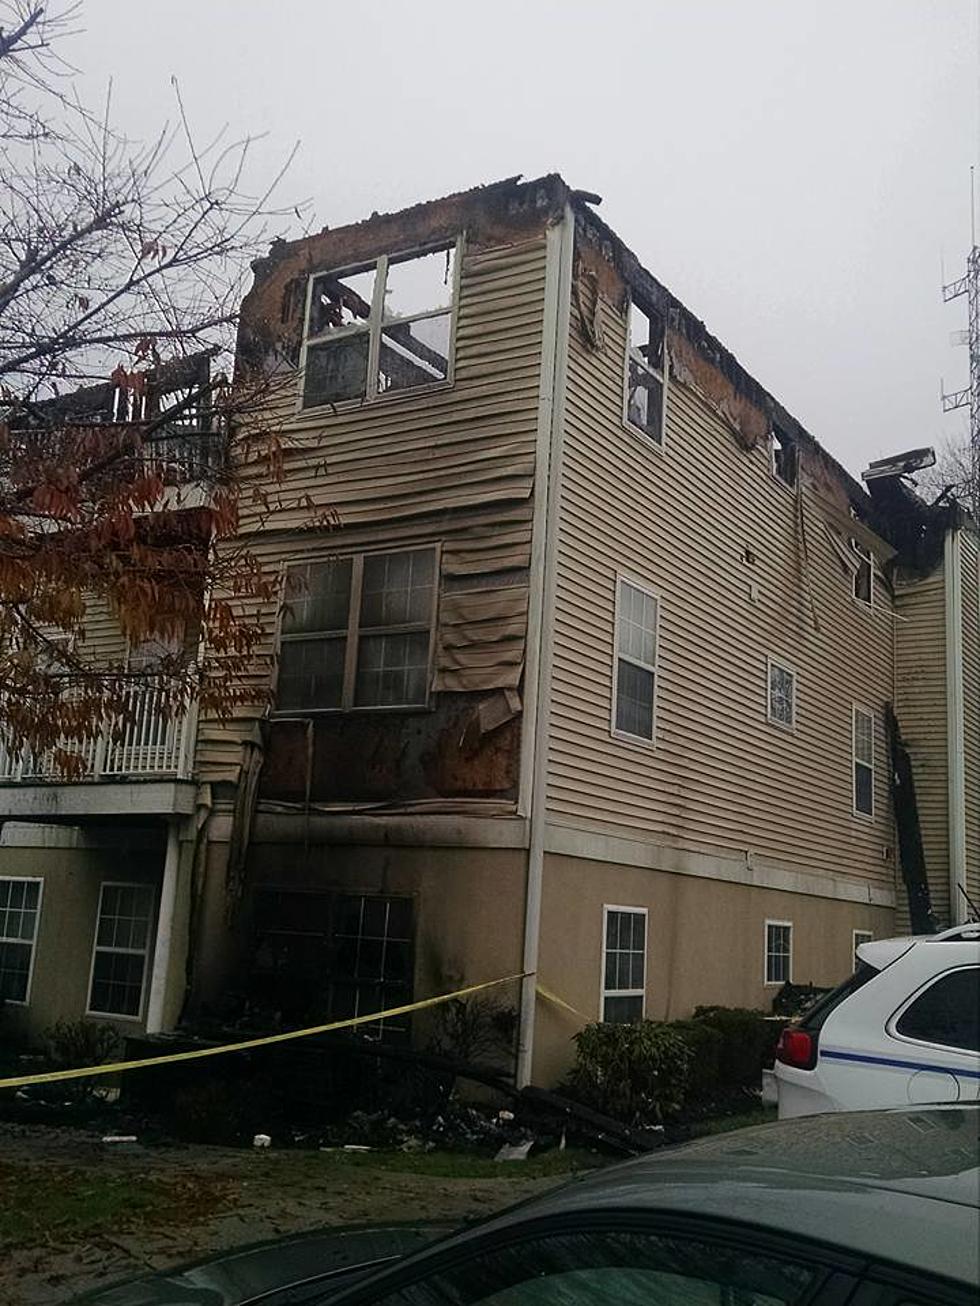 Over 30 Senior Citizens in Carmel Are Homeless After Fire